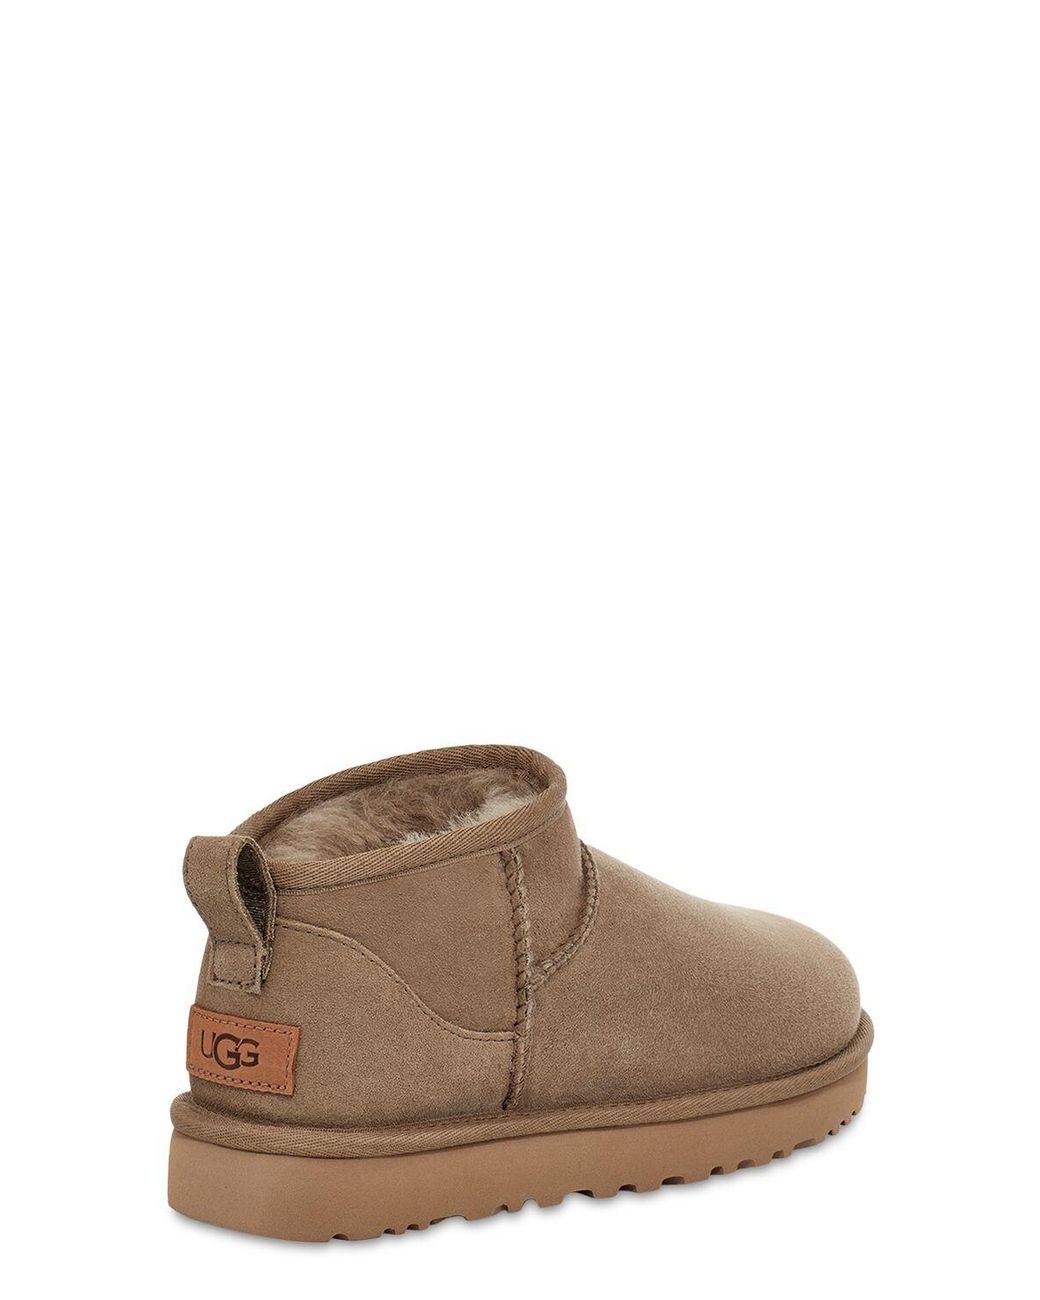 UGG Suede 10mm Classic Ultra Mini Shearling Boots in Taupe (Brown) | Lyst